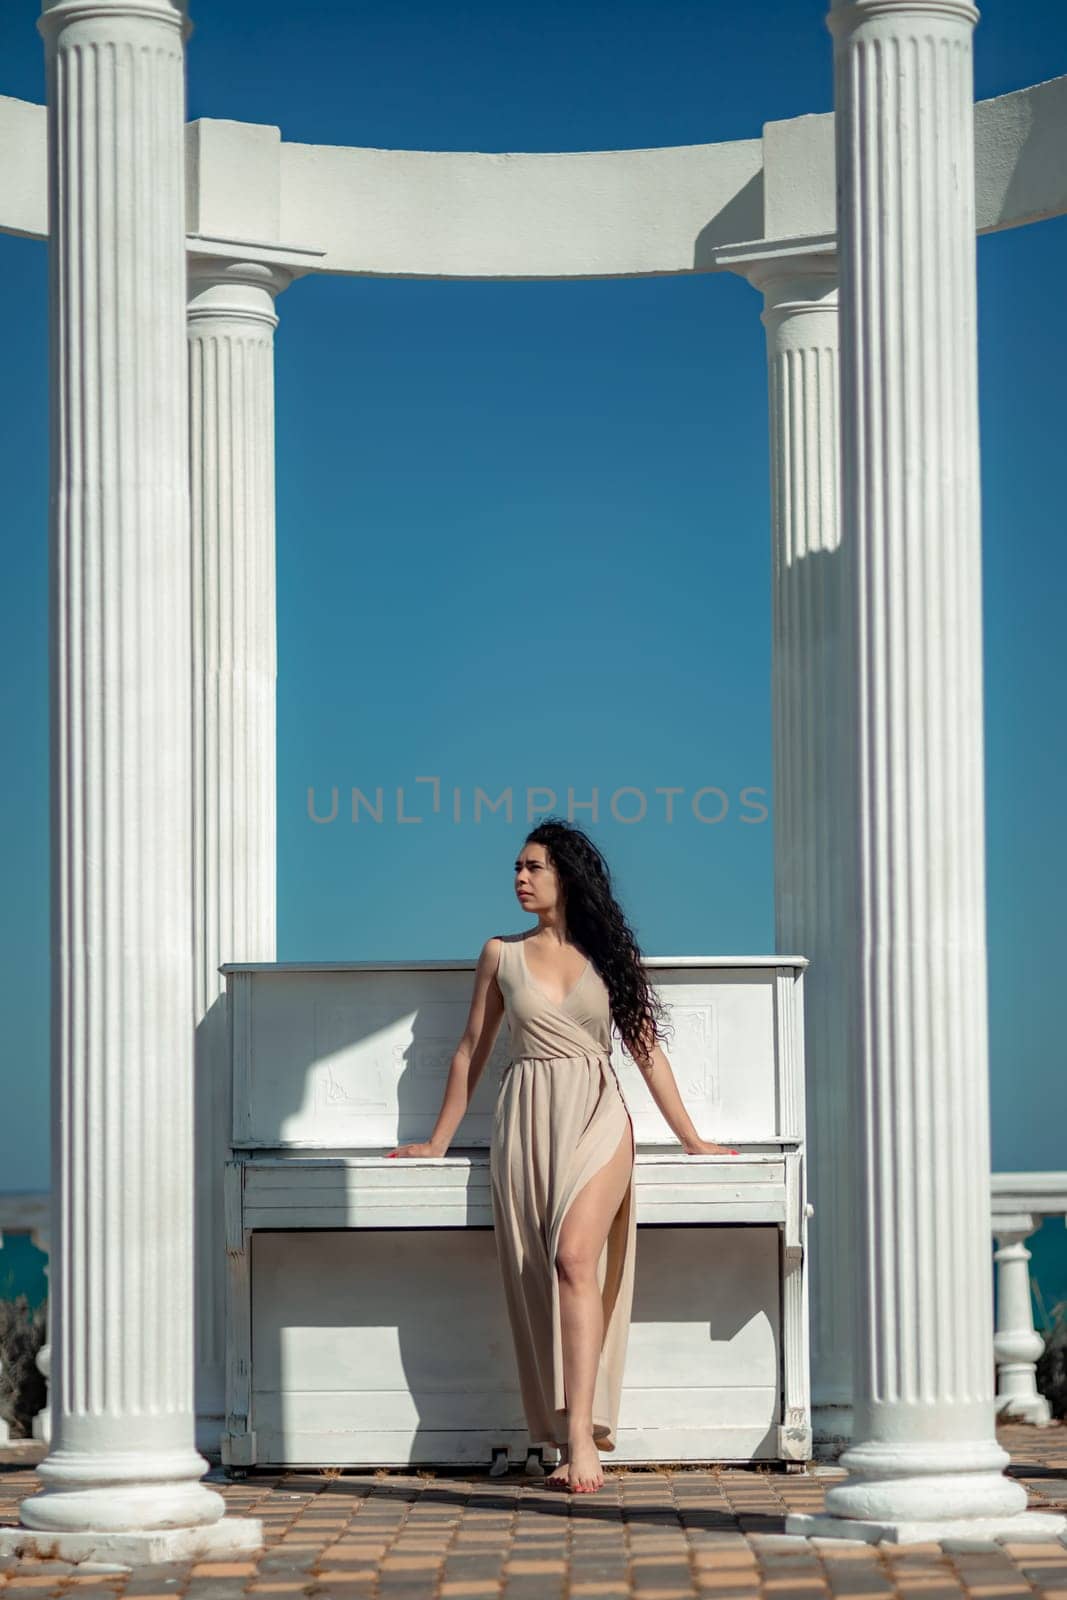 A woman in a long dress stands in front of a piano. The piano is white and has a few keys visible. The woman is posing for a photo, and the overall mood of the image is calm and serene. by Matiunina